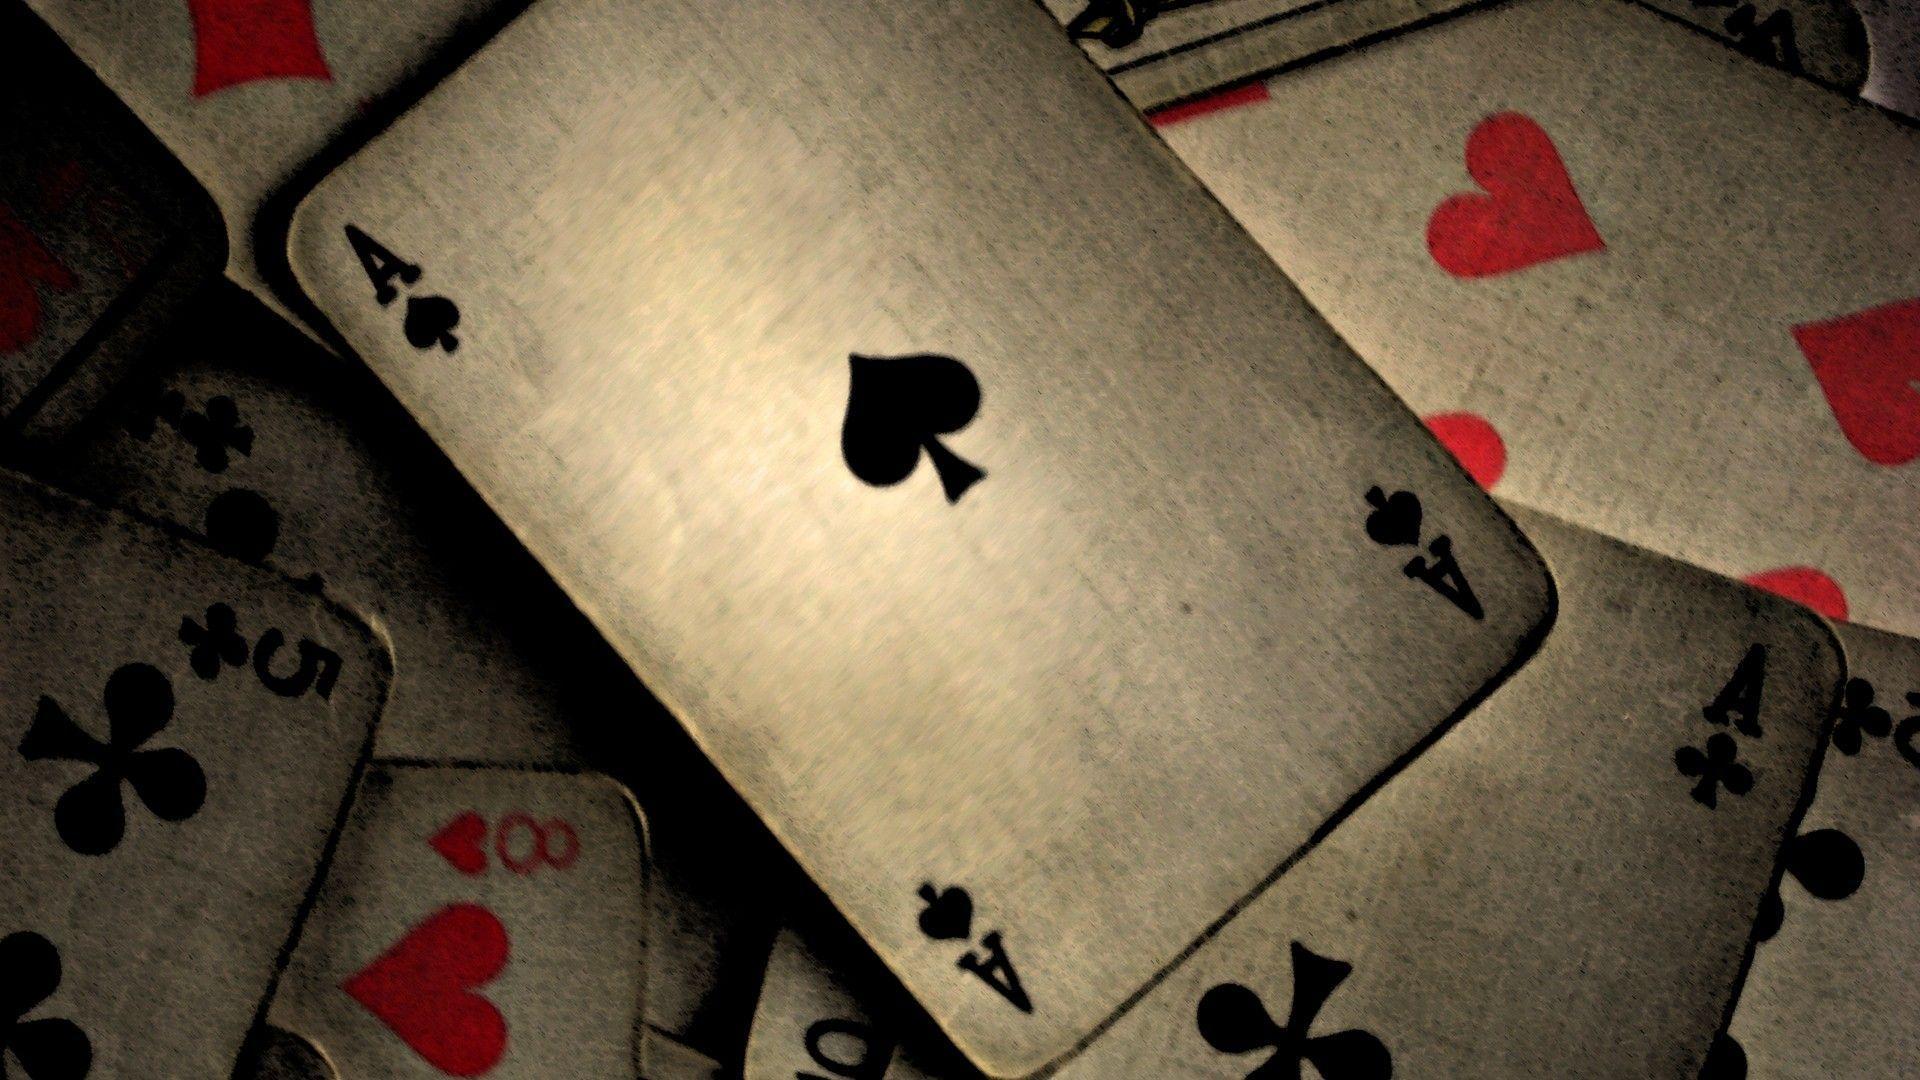 Whatsapp Best Wallpaper Image and Dp Biggest Collection. Poker